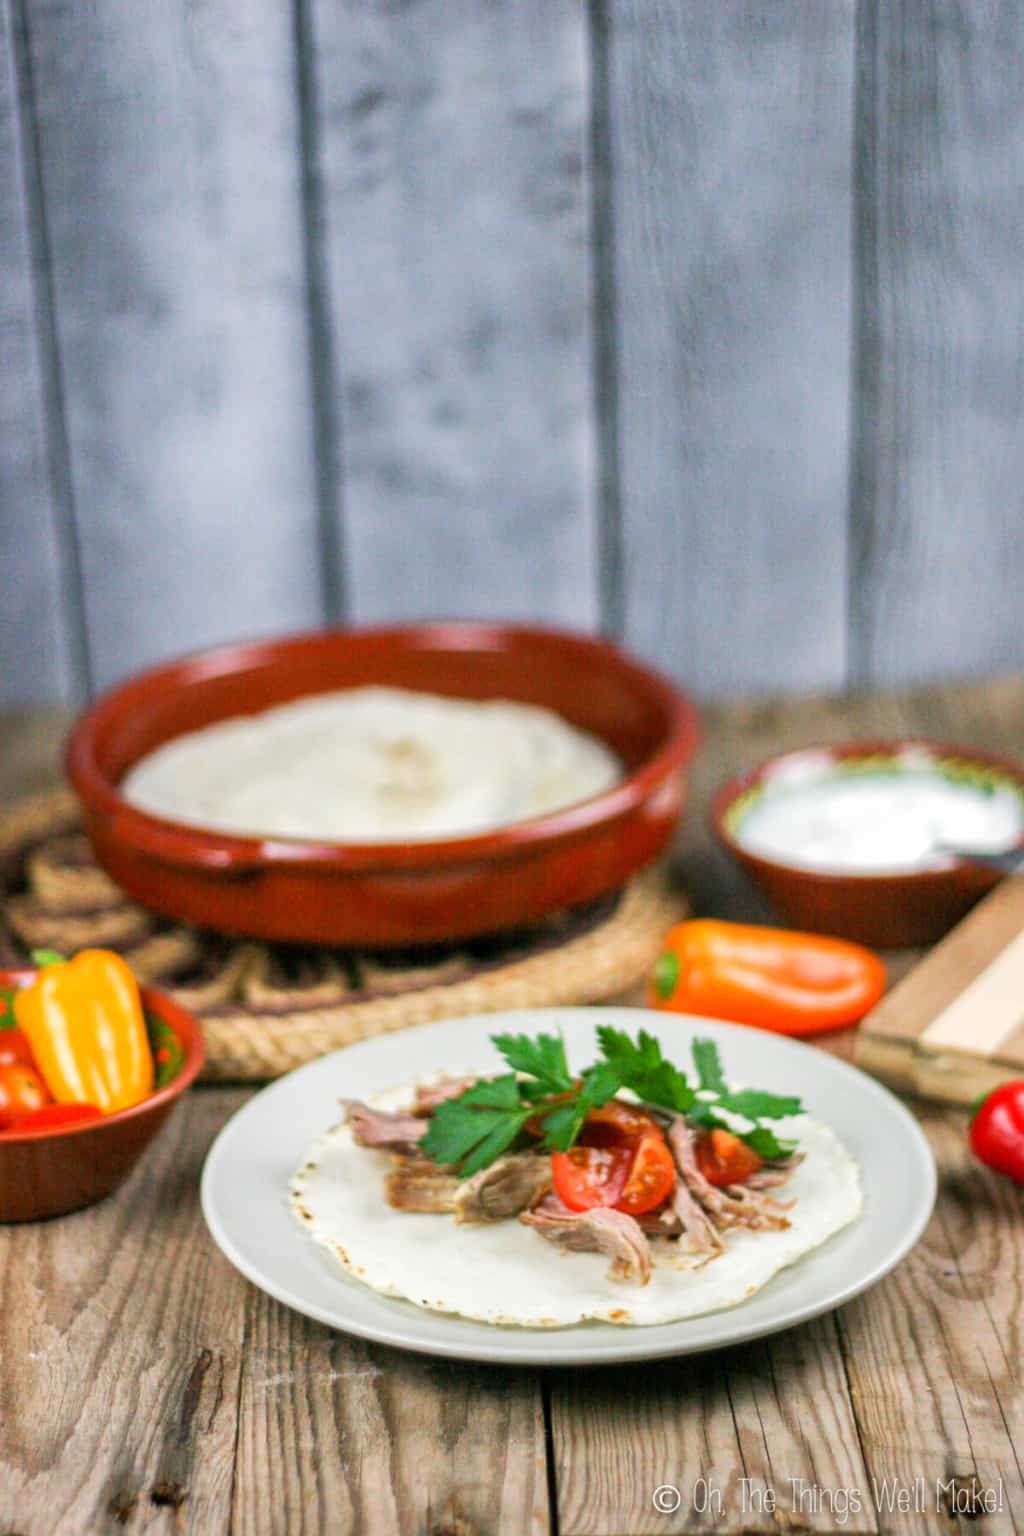 Pork carnitas on a corn tortilla on a plate, garnished with parsley and tomatoes. In the background, more tortillas can be seen. 